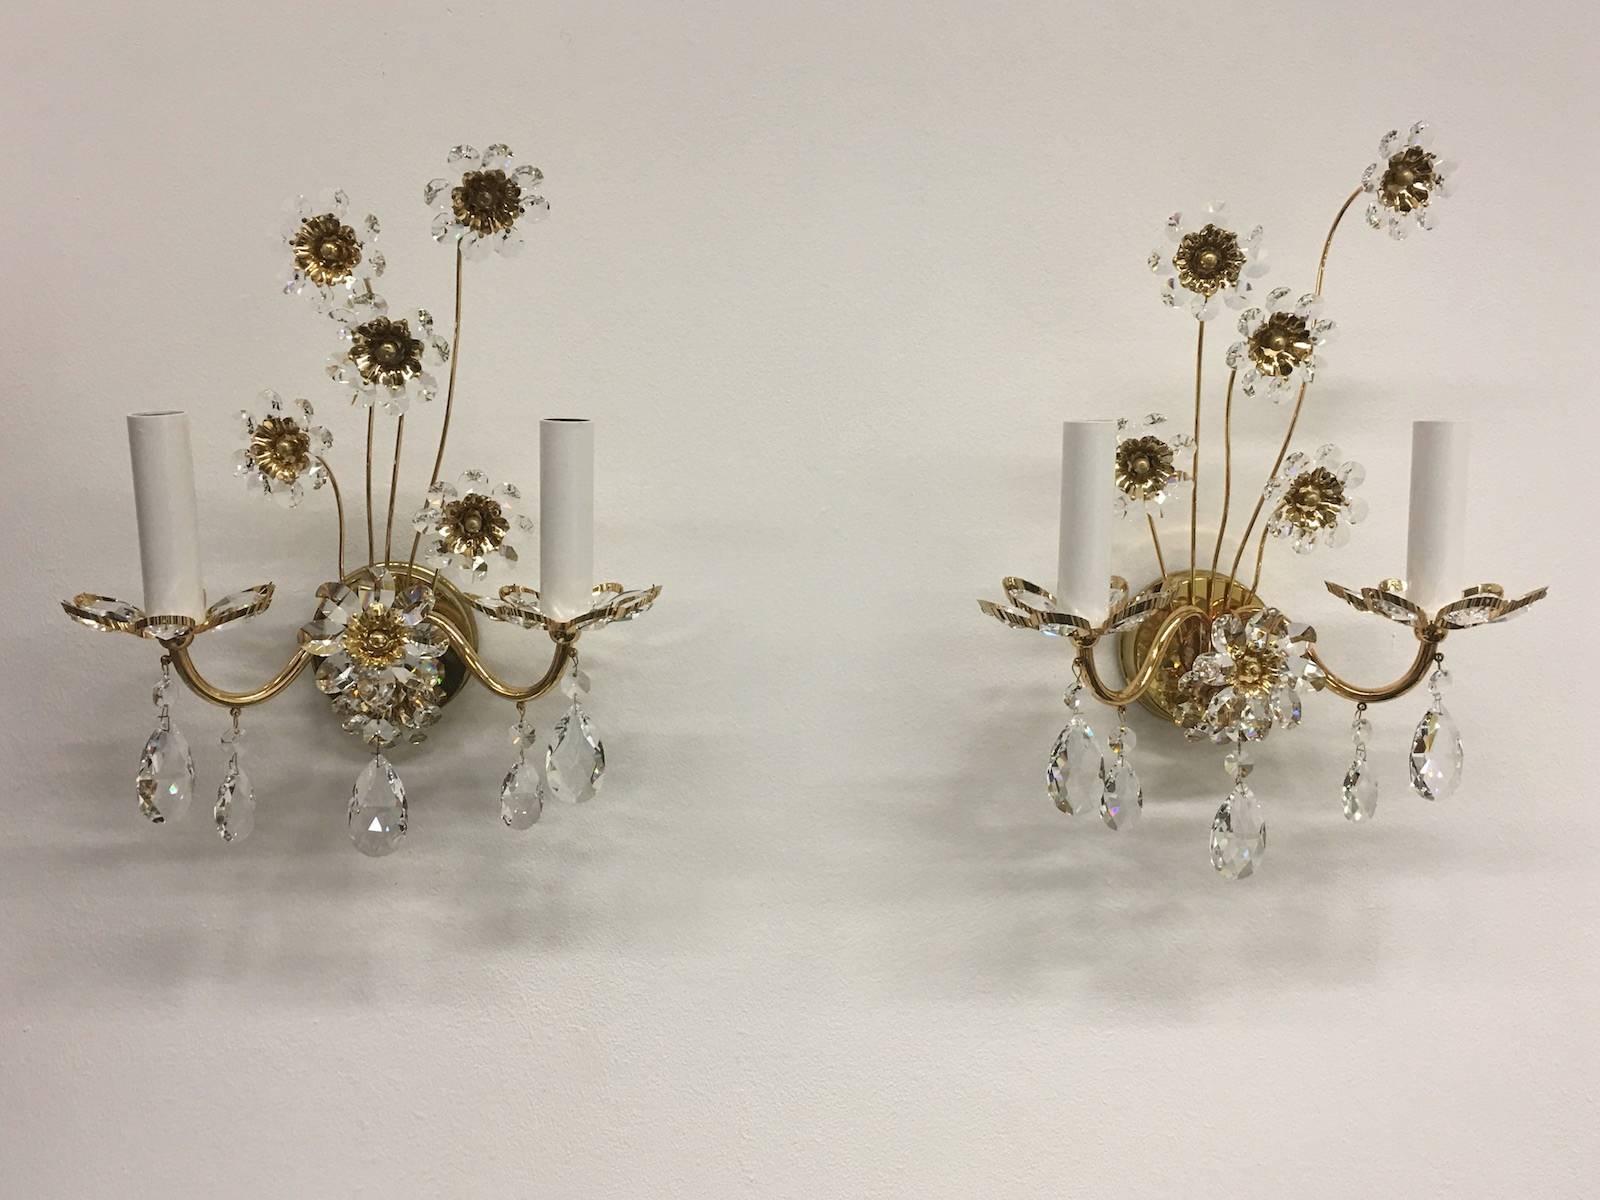 Pair of vintage gold-plated sconces with faceted crystal flowers made by the German company Palwa. Each fixture has two European style E14 sockets. It requires two European E14 candelabra bulbs.